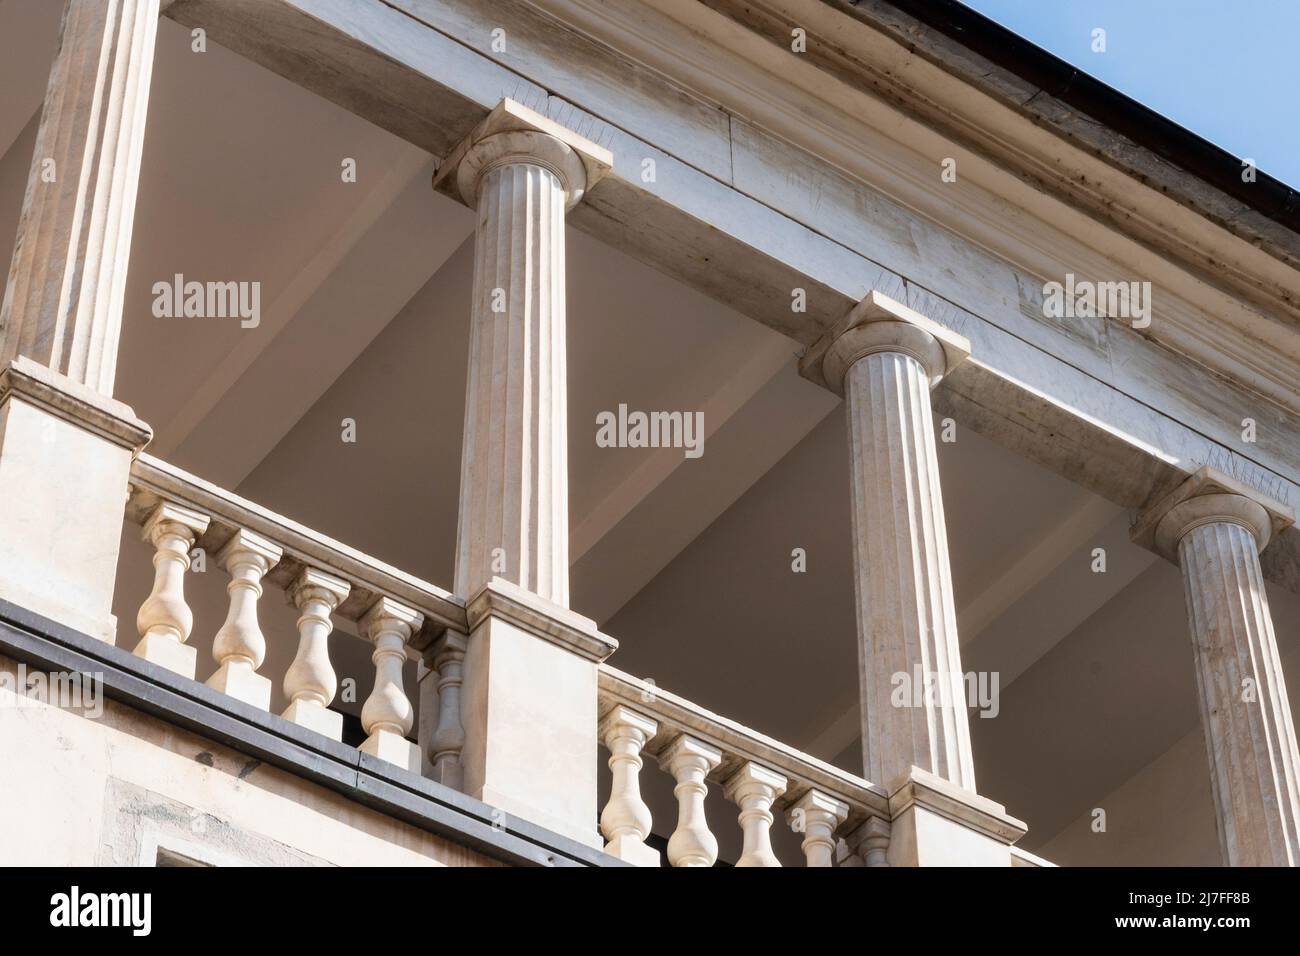 Balcony surrounded by a balustrade and columns in Italian marble Stock Photo